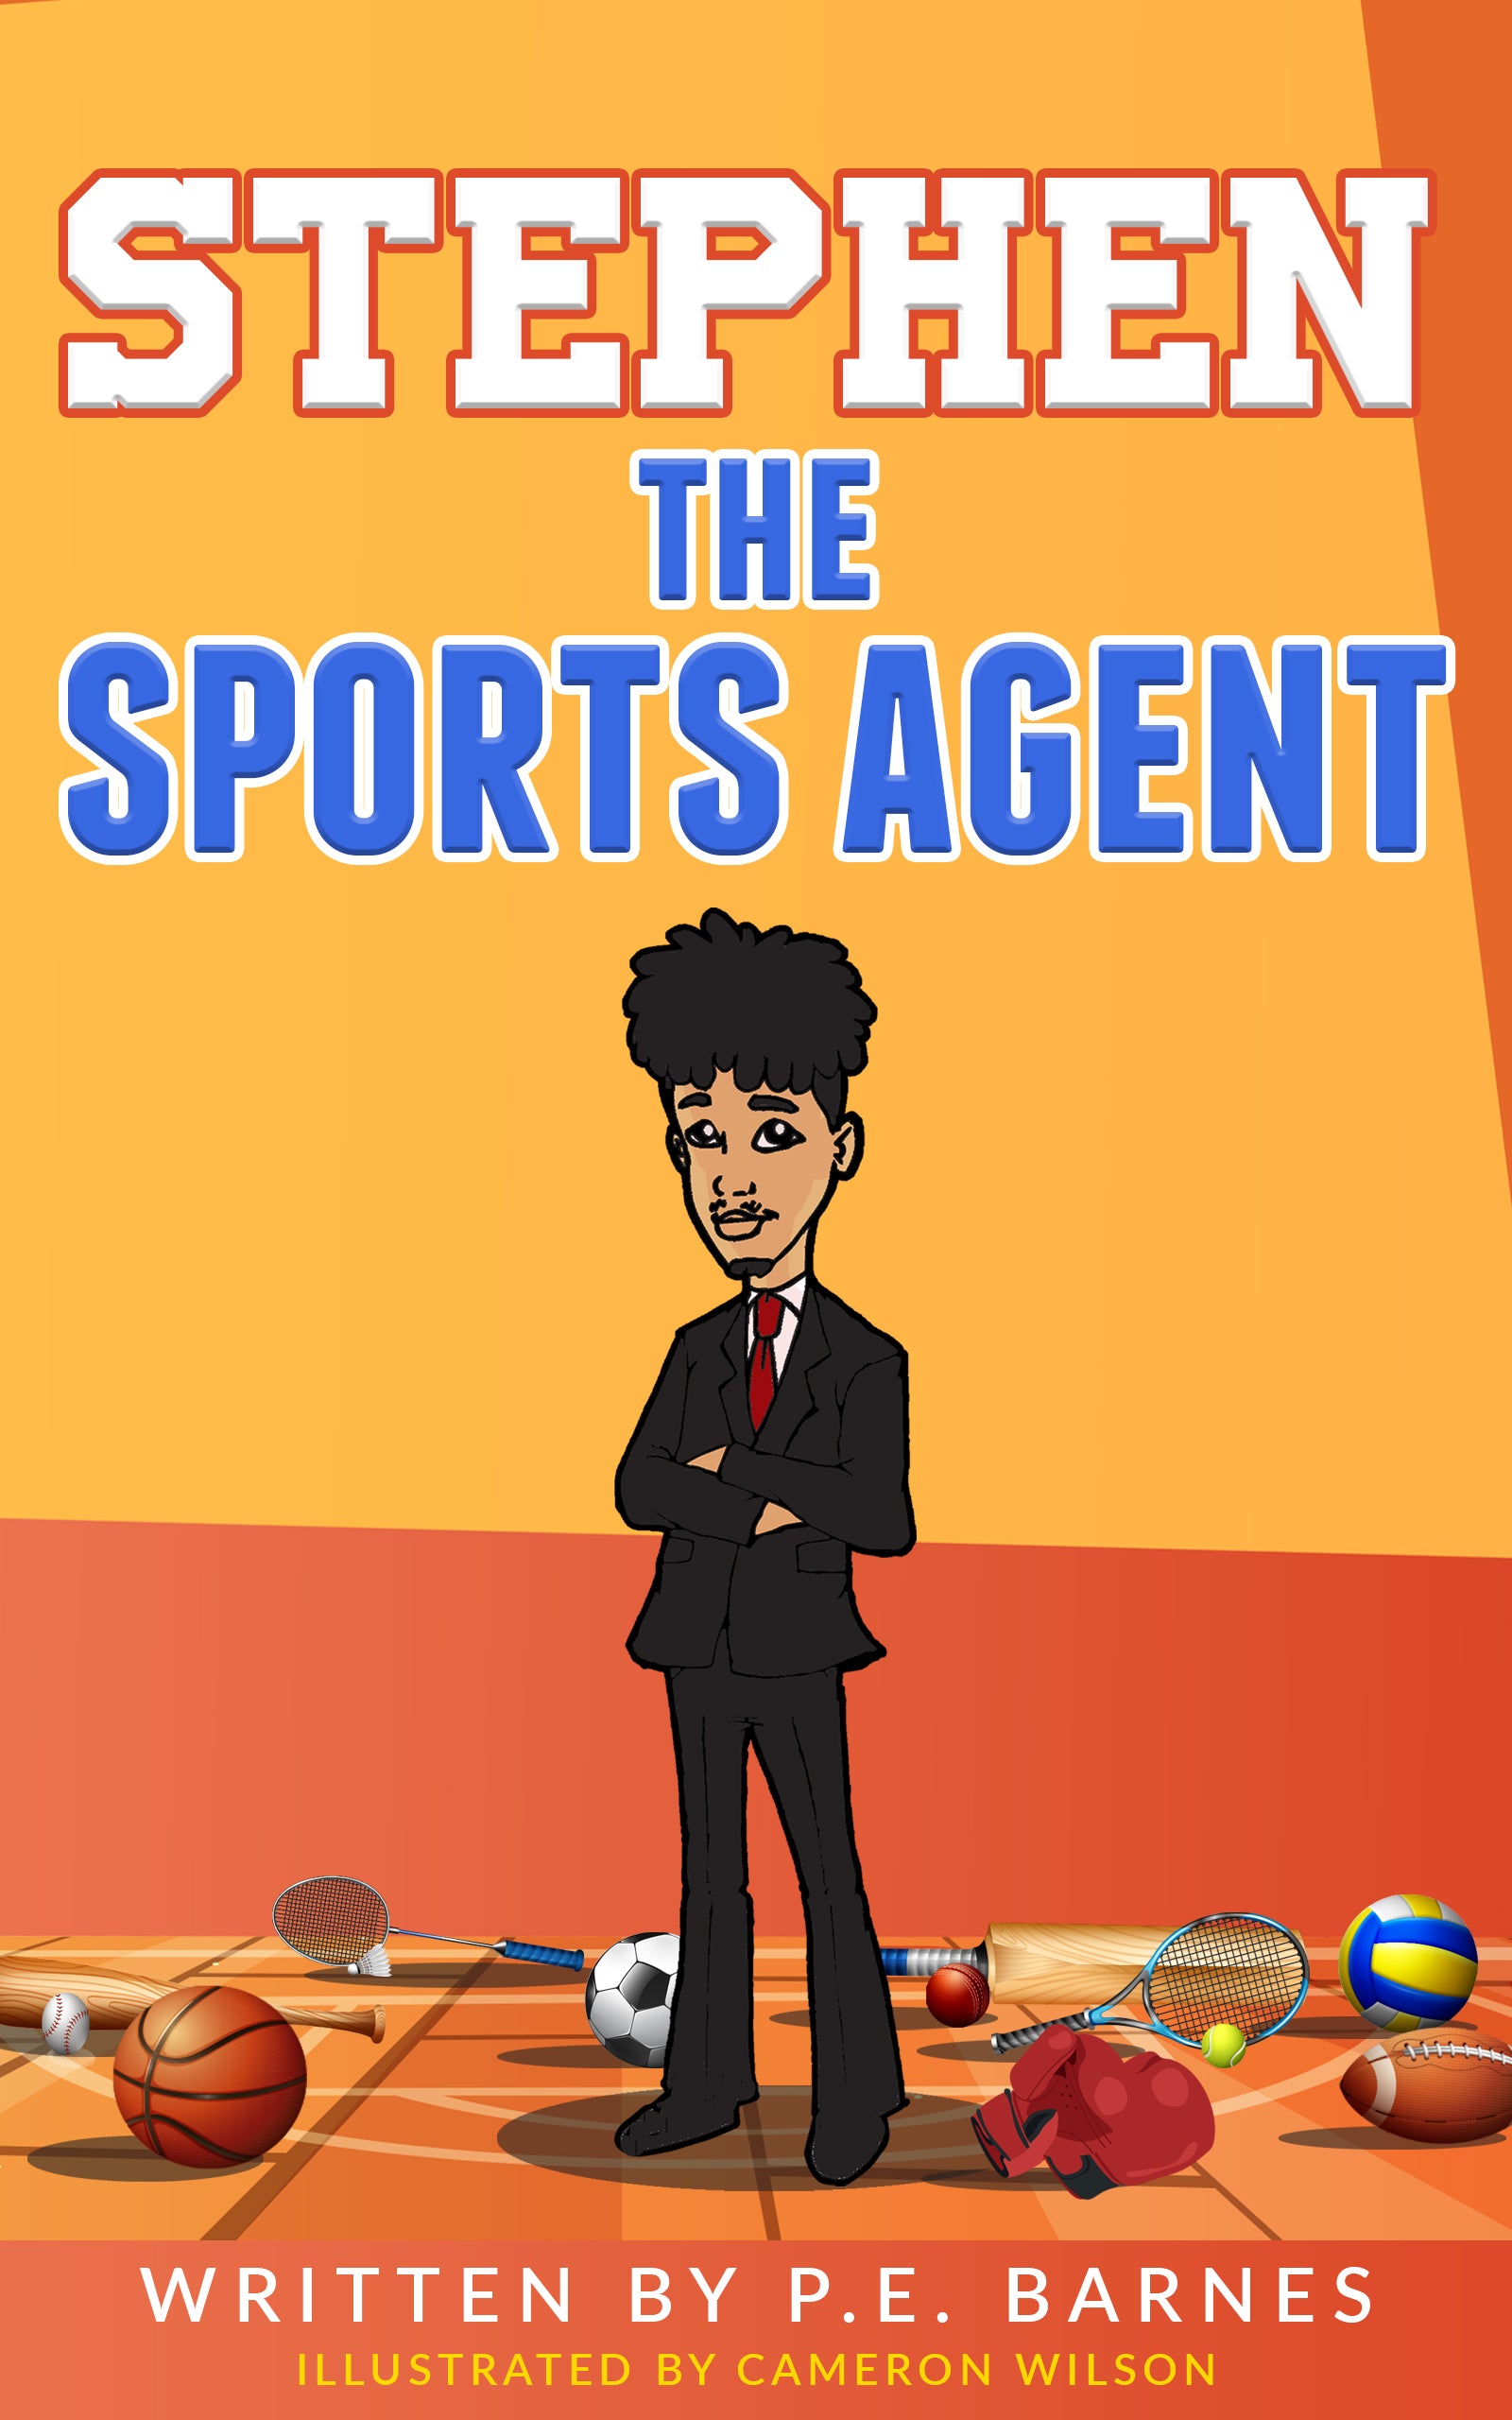 Stephen the Sports Agent (Ages 9-12) ⭐️⭐️⭐️⭐️⭐️